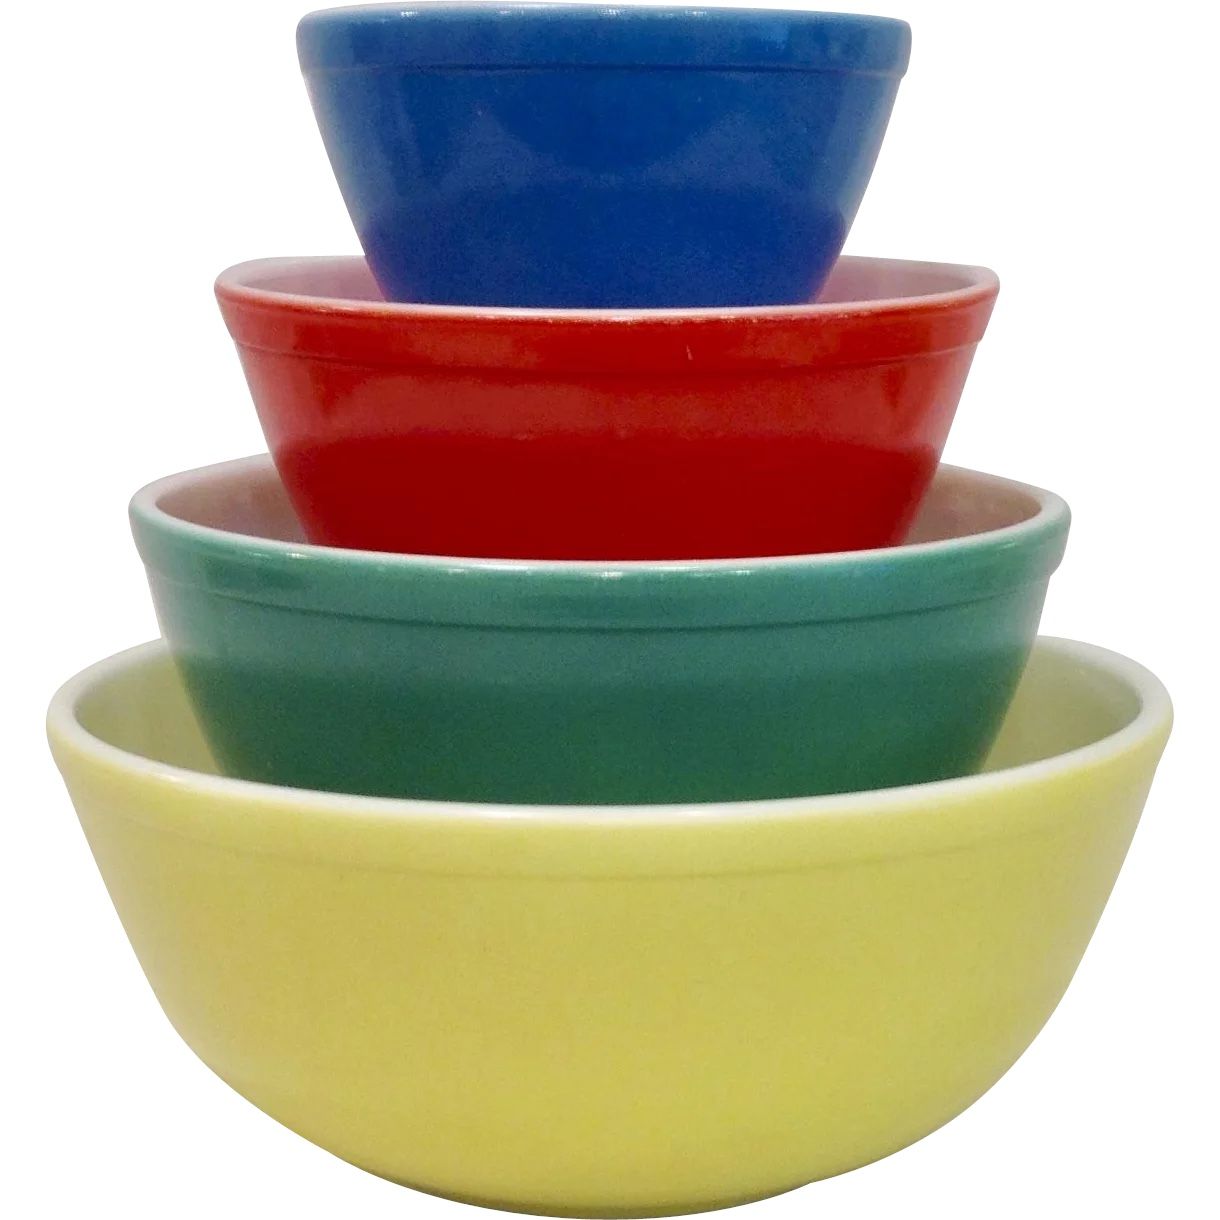 Vintage Pyrex Primary Color Nesting Mixing Bowl Set